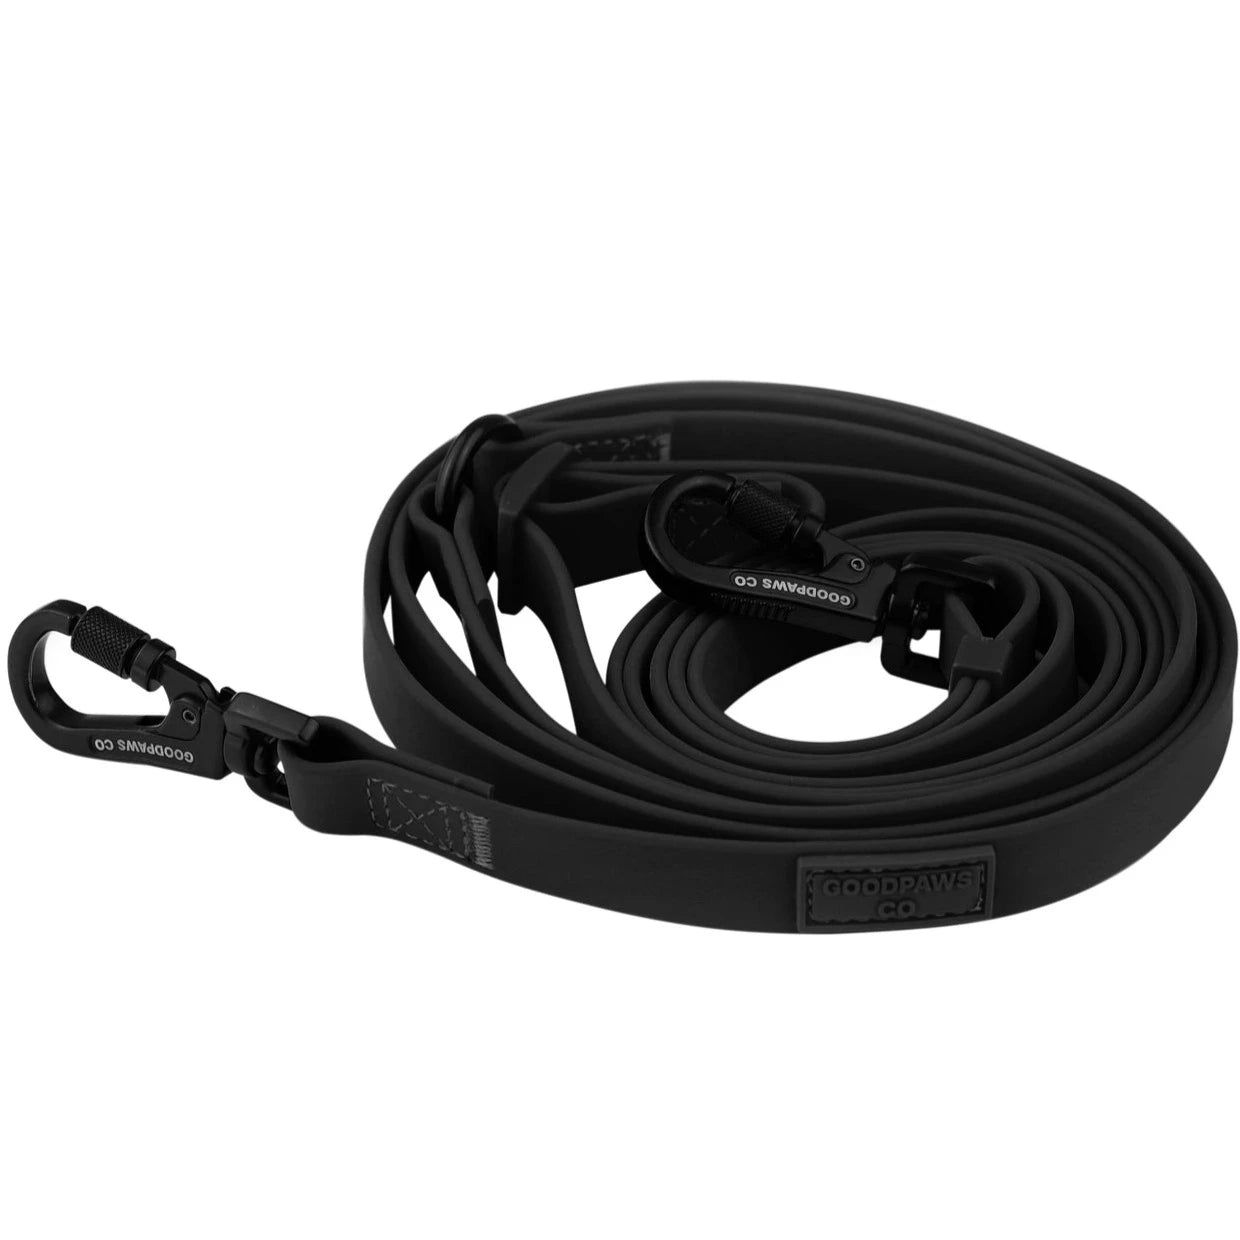 Soft-Touch Waterproof Hands-Free Leash - Black